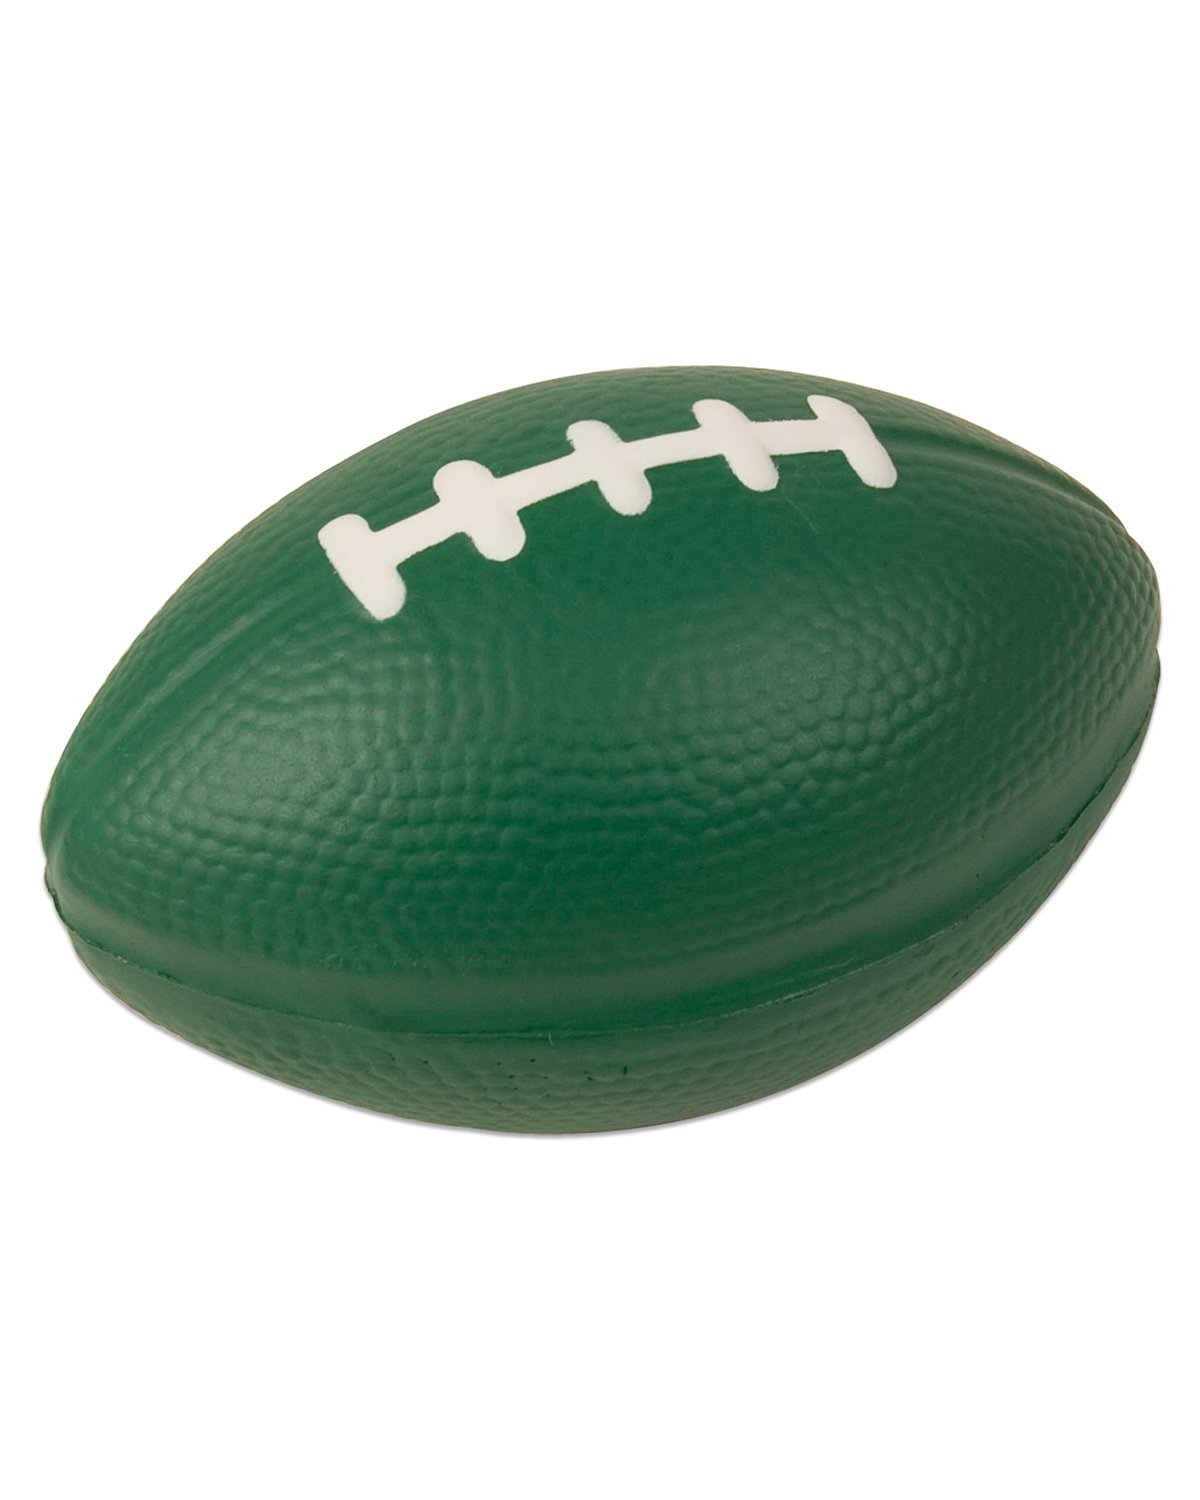 Prime Line Football Stress Reliever 3" hunter green 